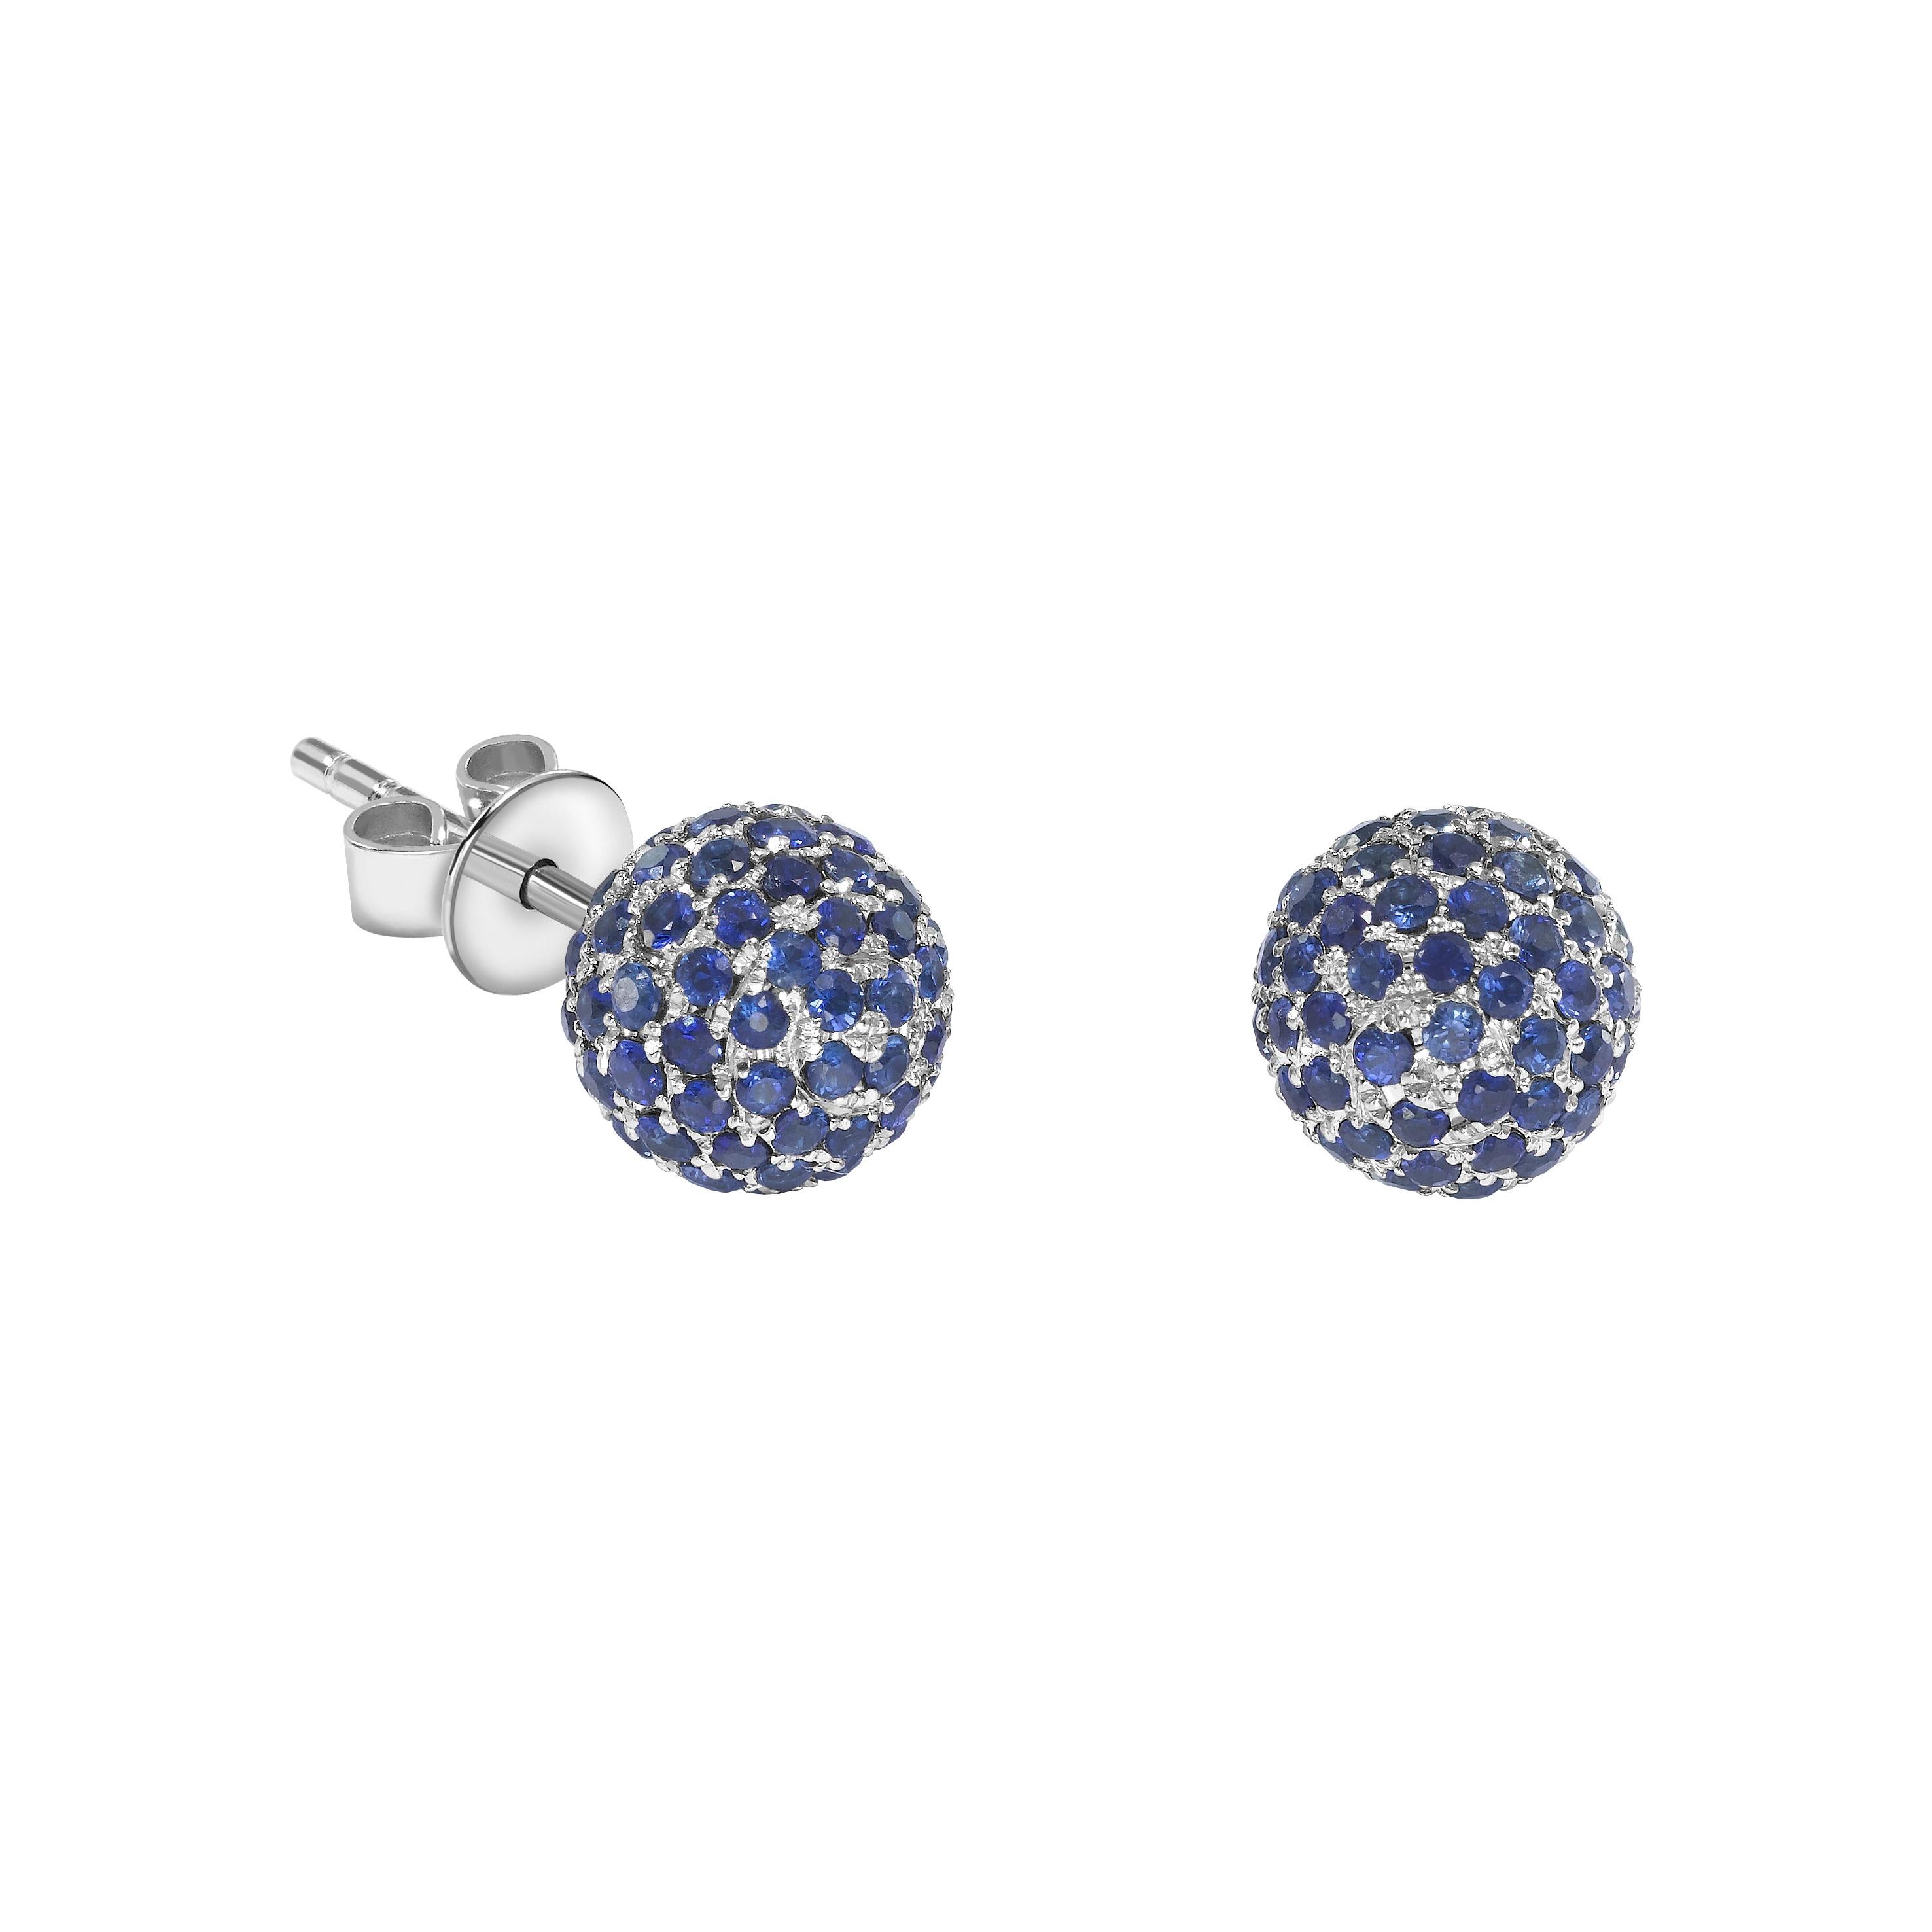 sapphire pave earrings